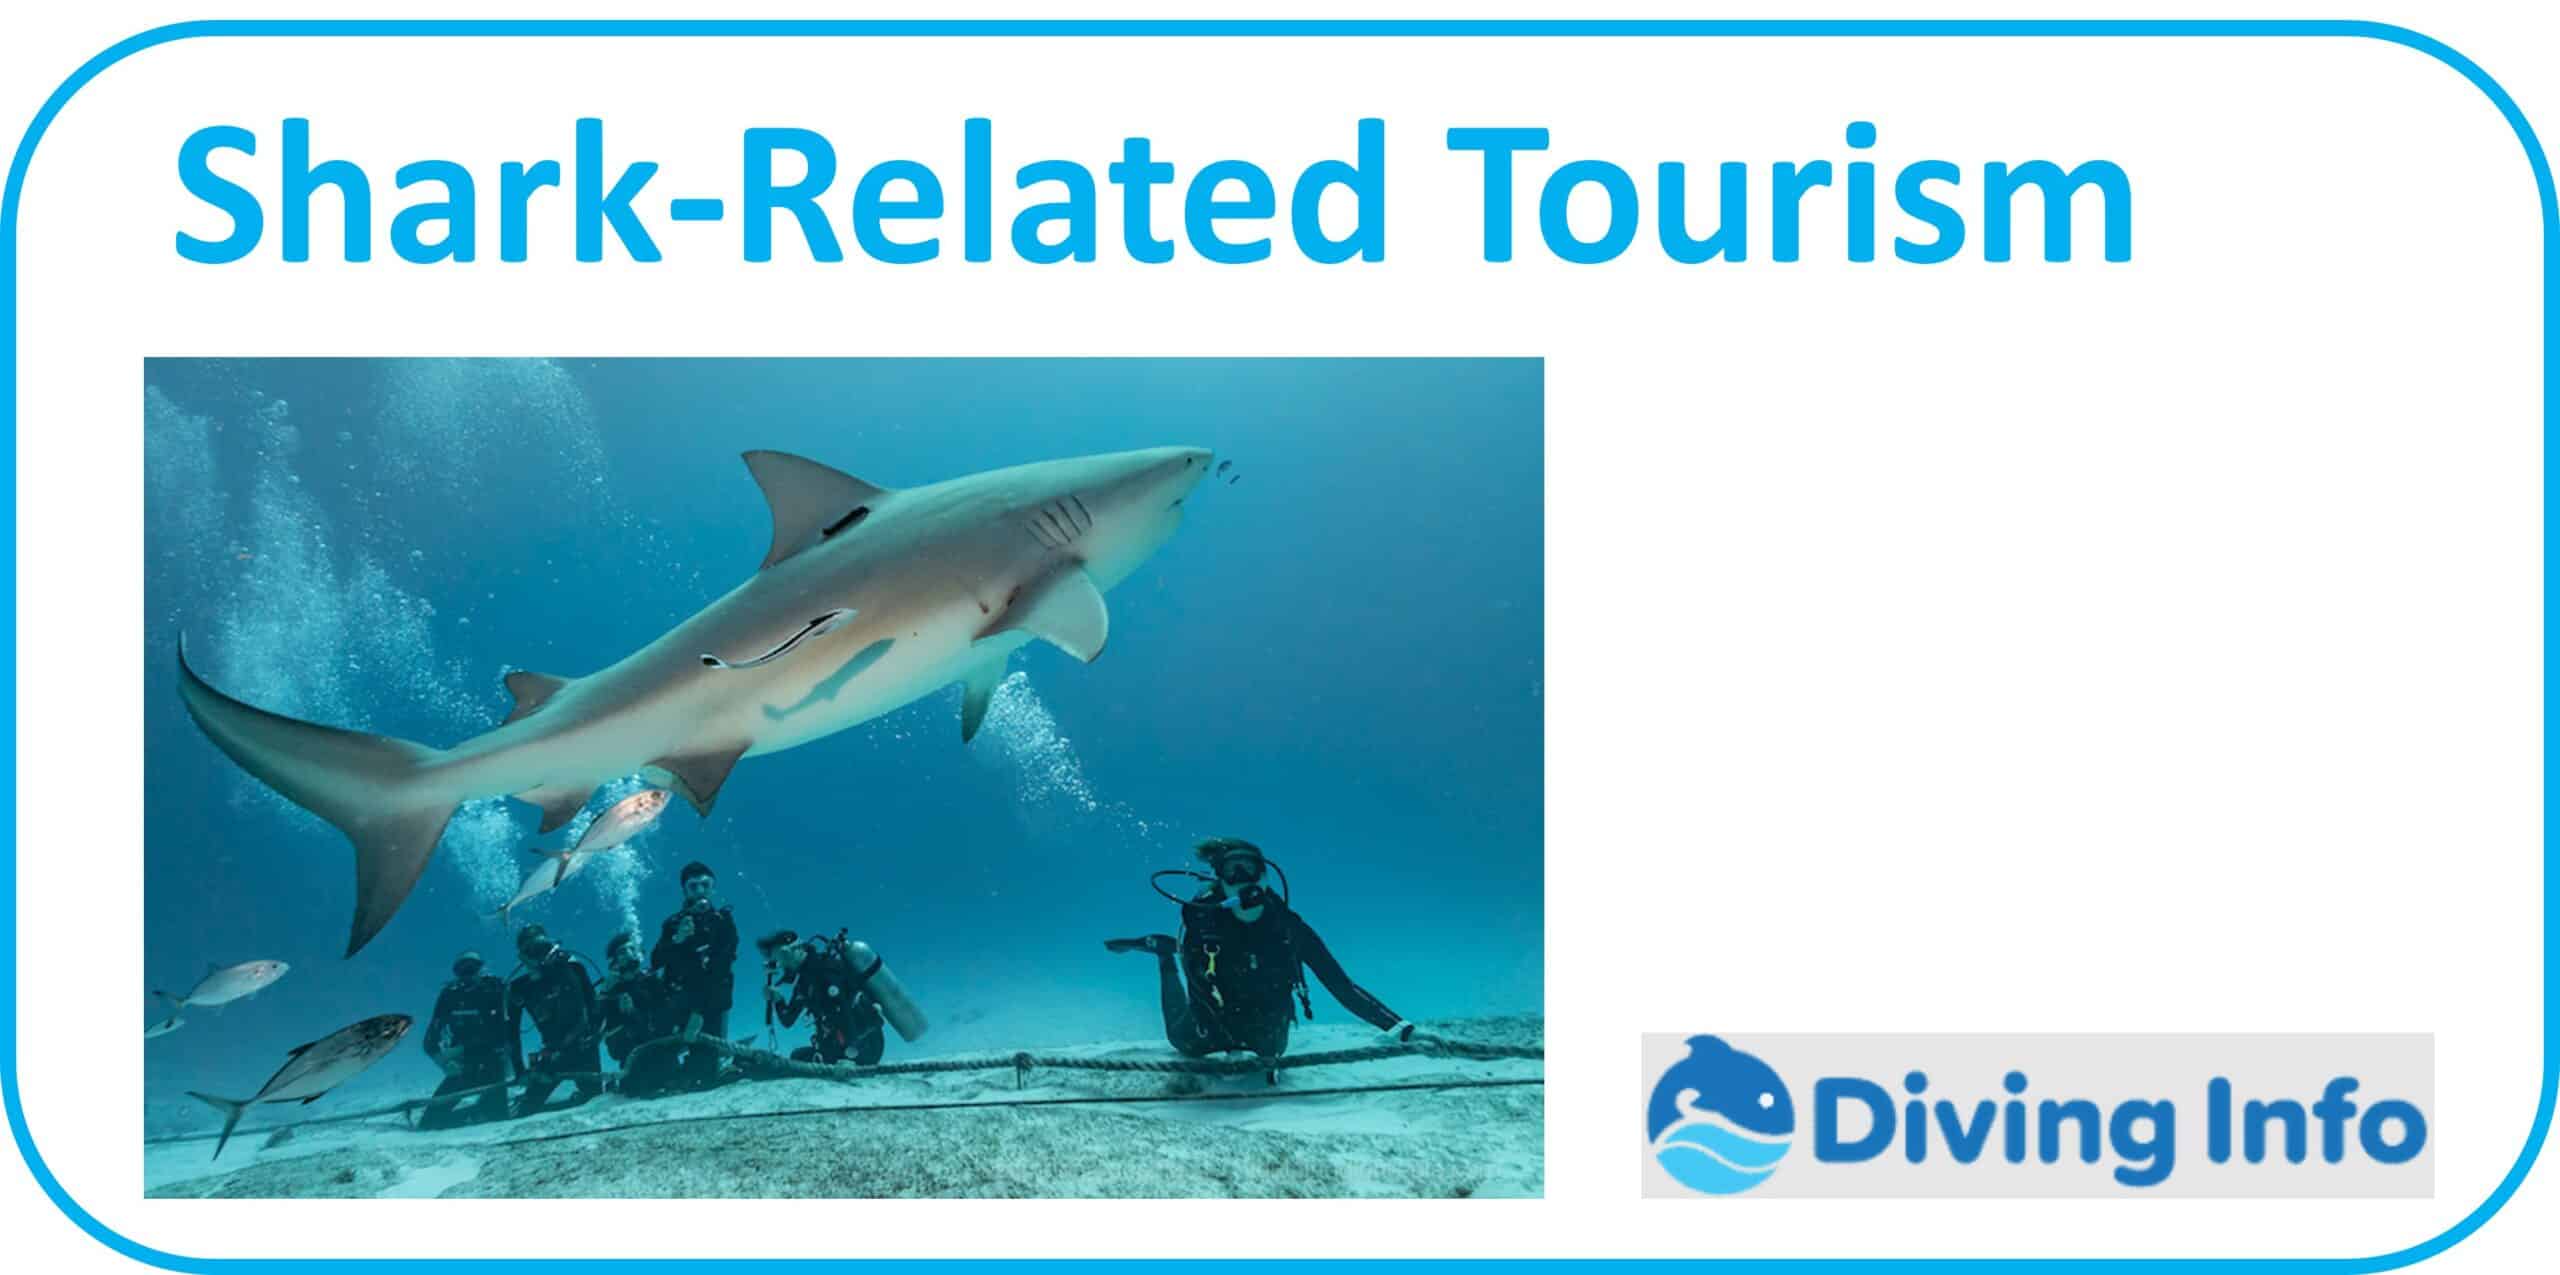 Shark-Related Tourism